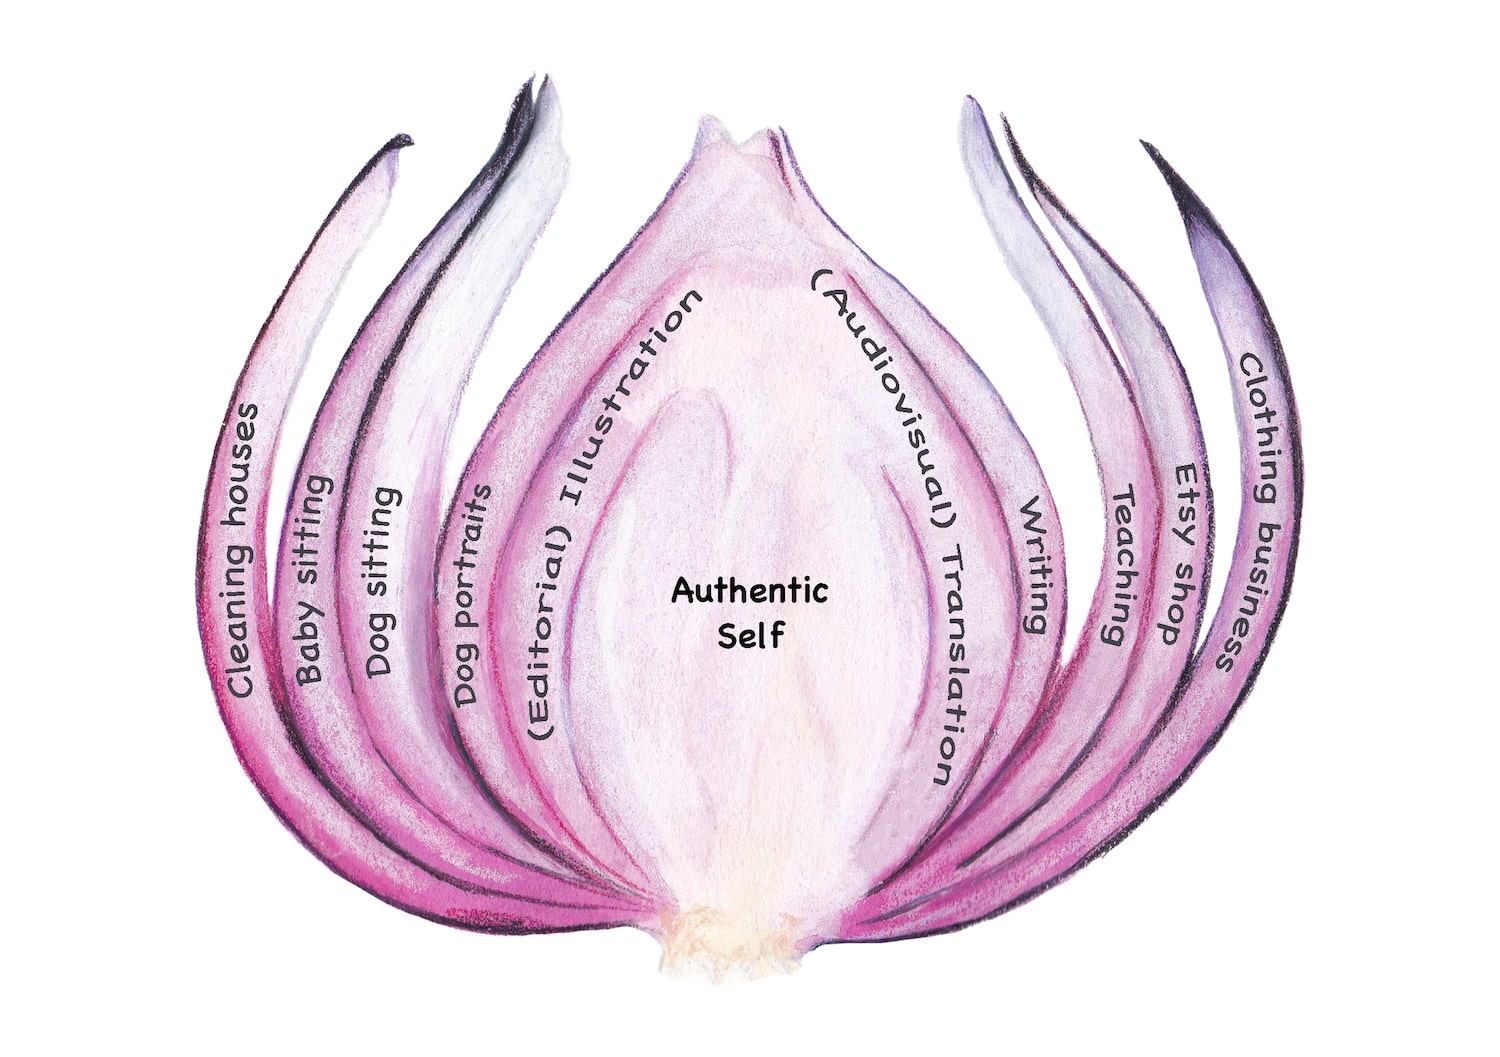 Illustration of an onion peeled back, labeled with different jobs and careers on its layers